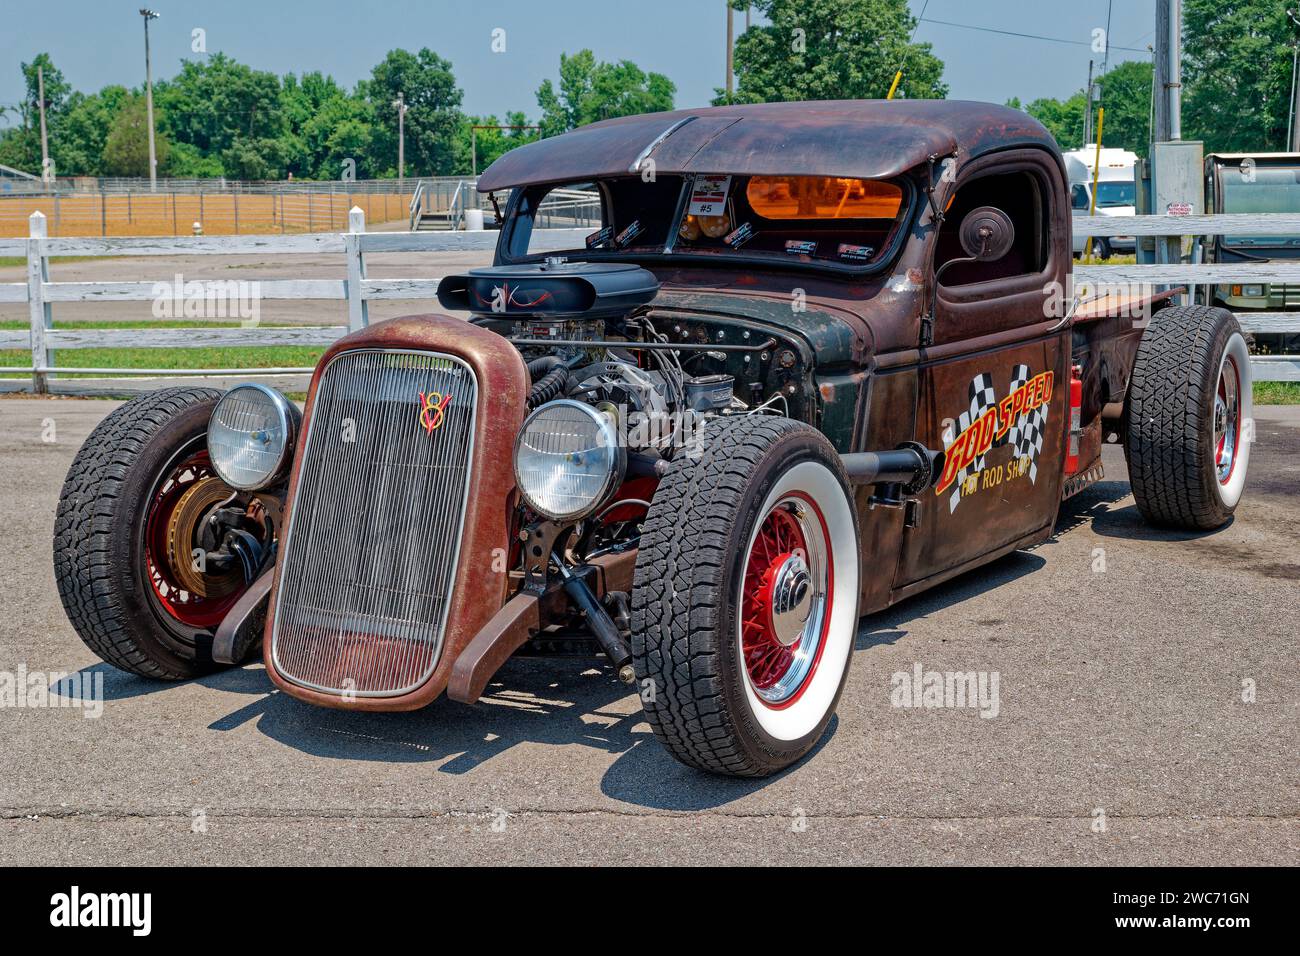 A hot rod or a rat rod on display at a spring car show closeup front to side full view on a sunny day in late springtime Stock Photo